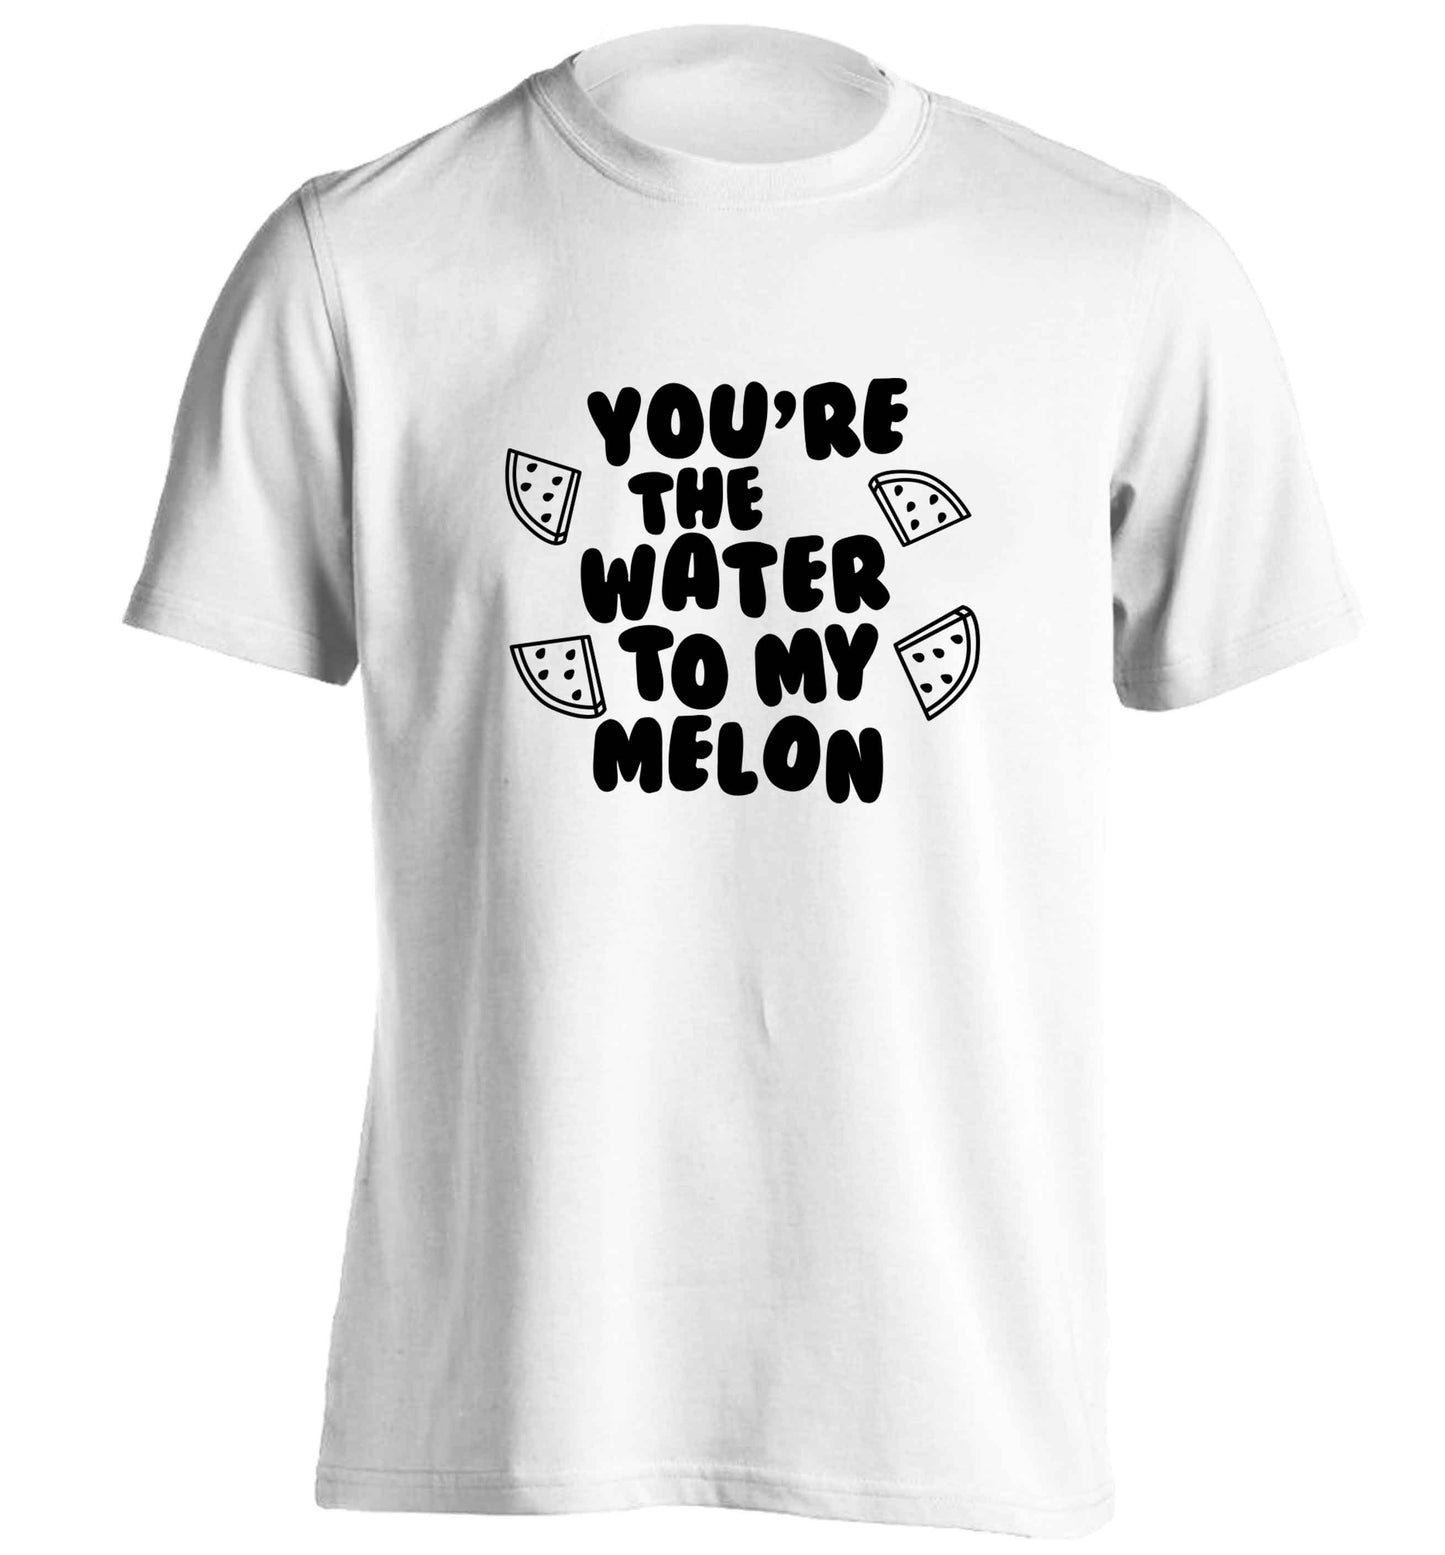 You're the water to my melon adults unisex white Tshirt 2XL